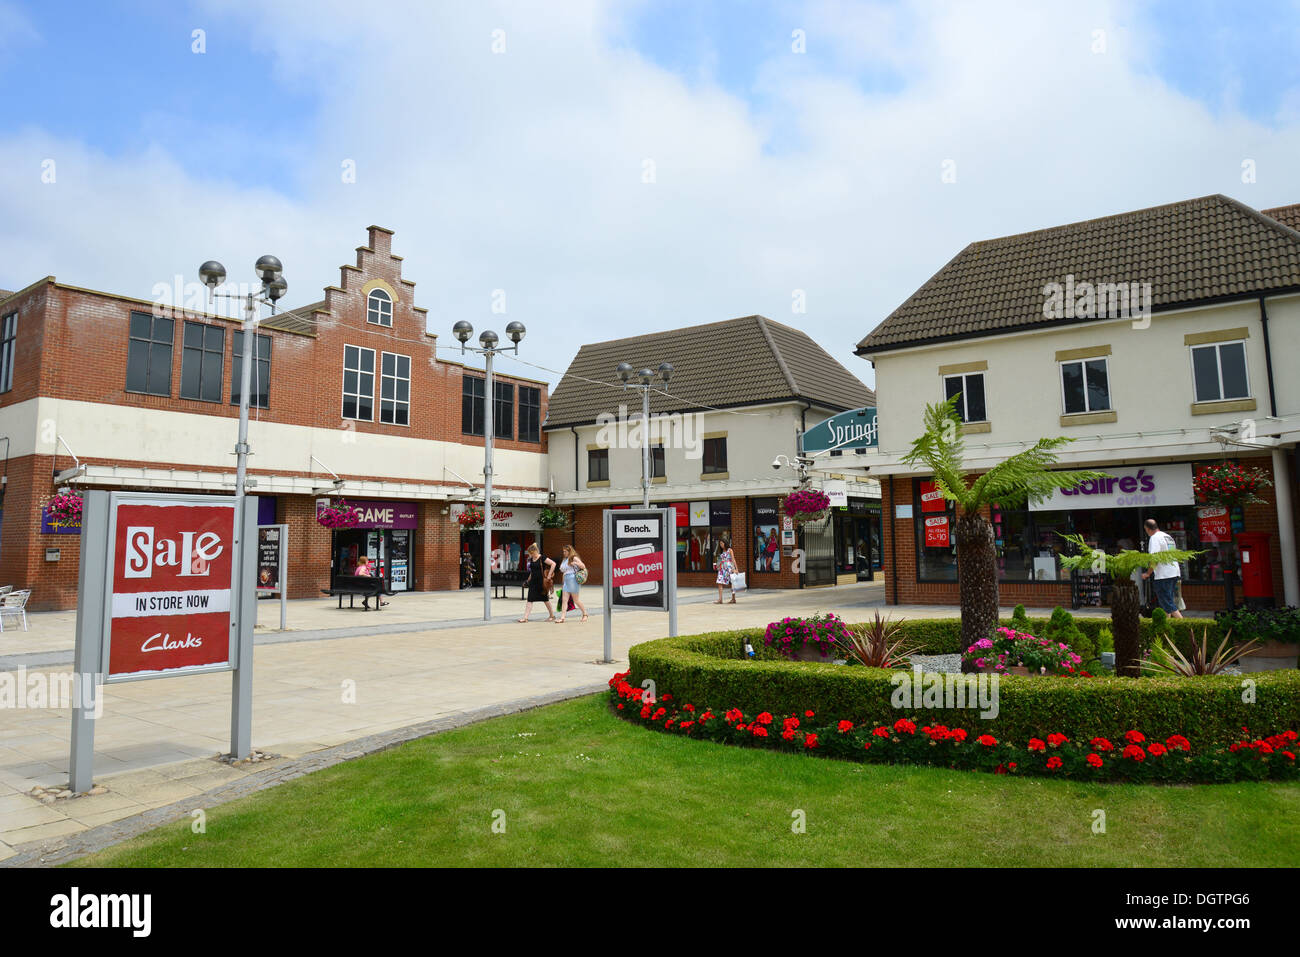 Springfields Outlet Shopping & Festival Gardens, Camelgate, Spalding,  Lincolnshire, England, United Kingdom Stock Photo - Alamy